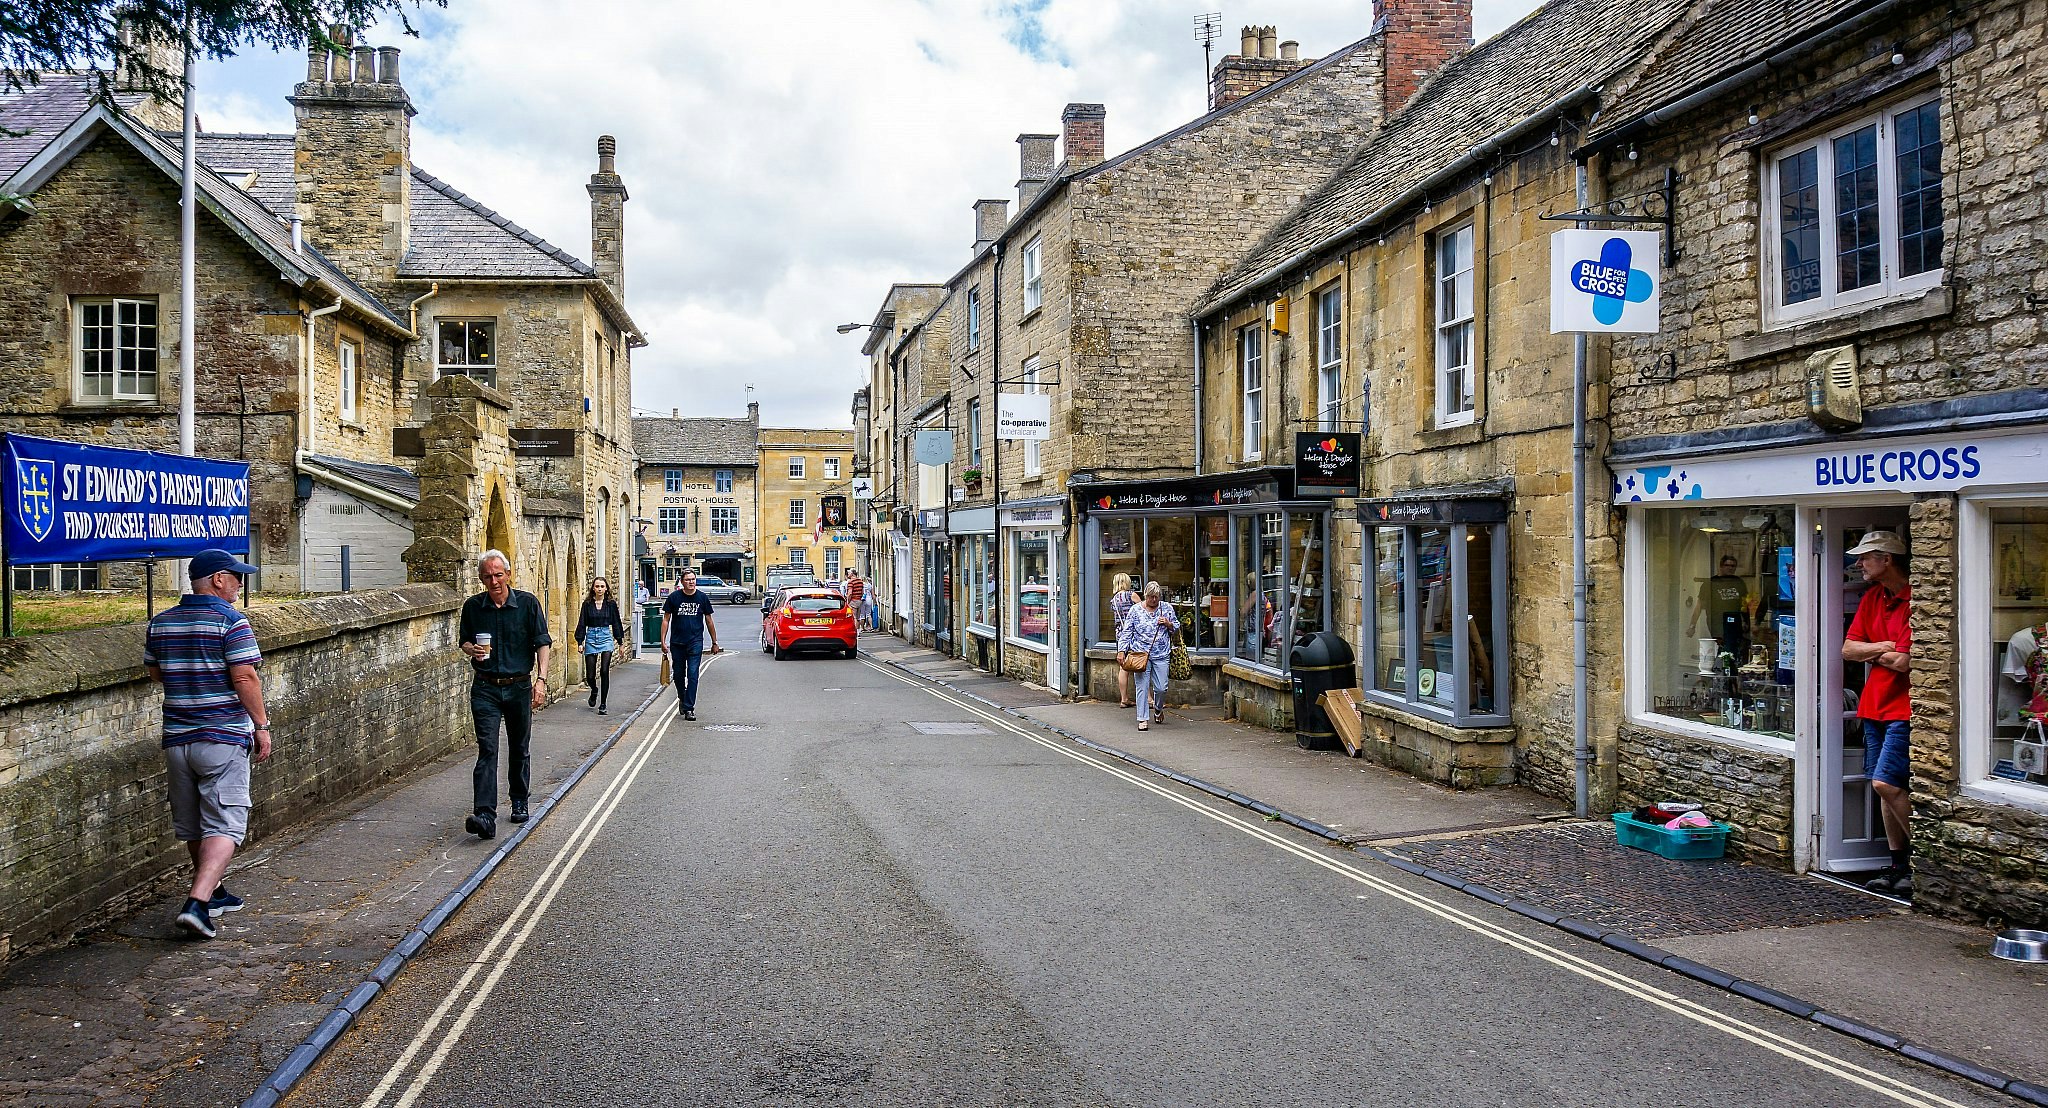 People walking down a high street past shops housed in quaint stone buildings.